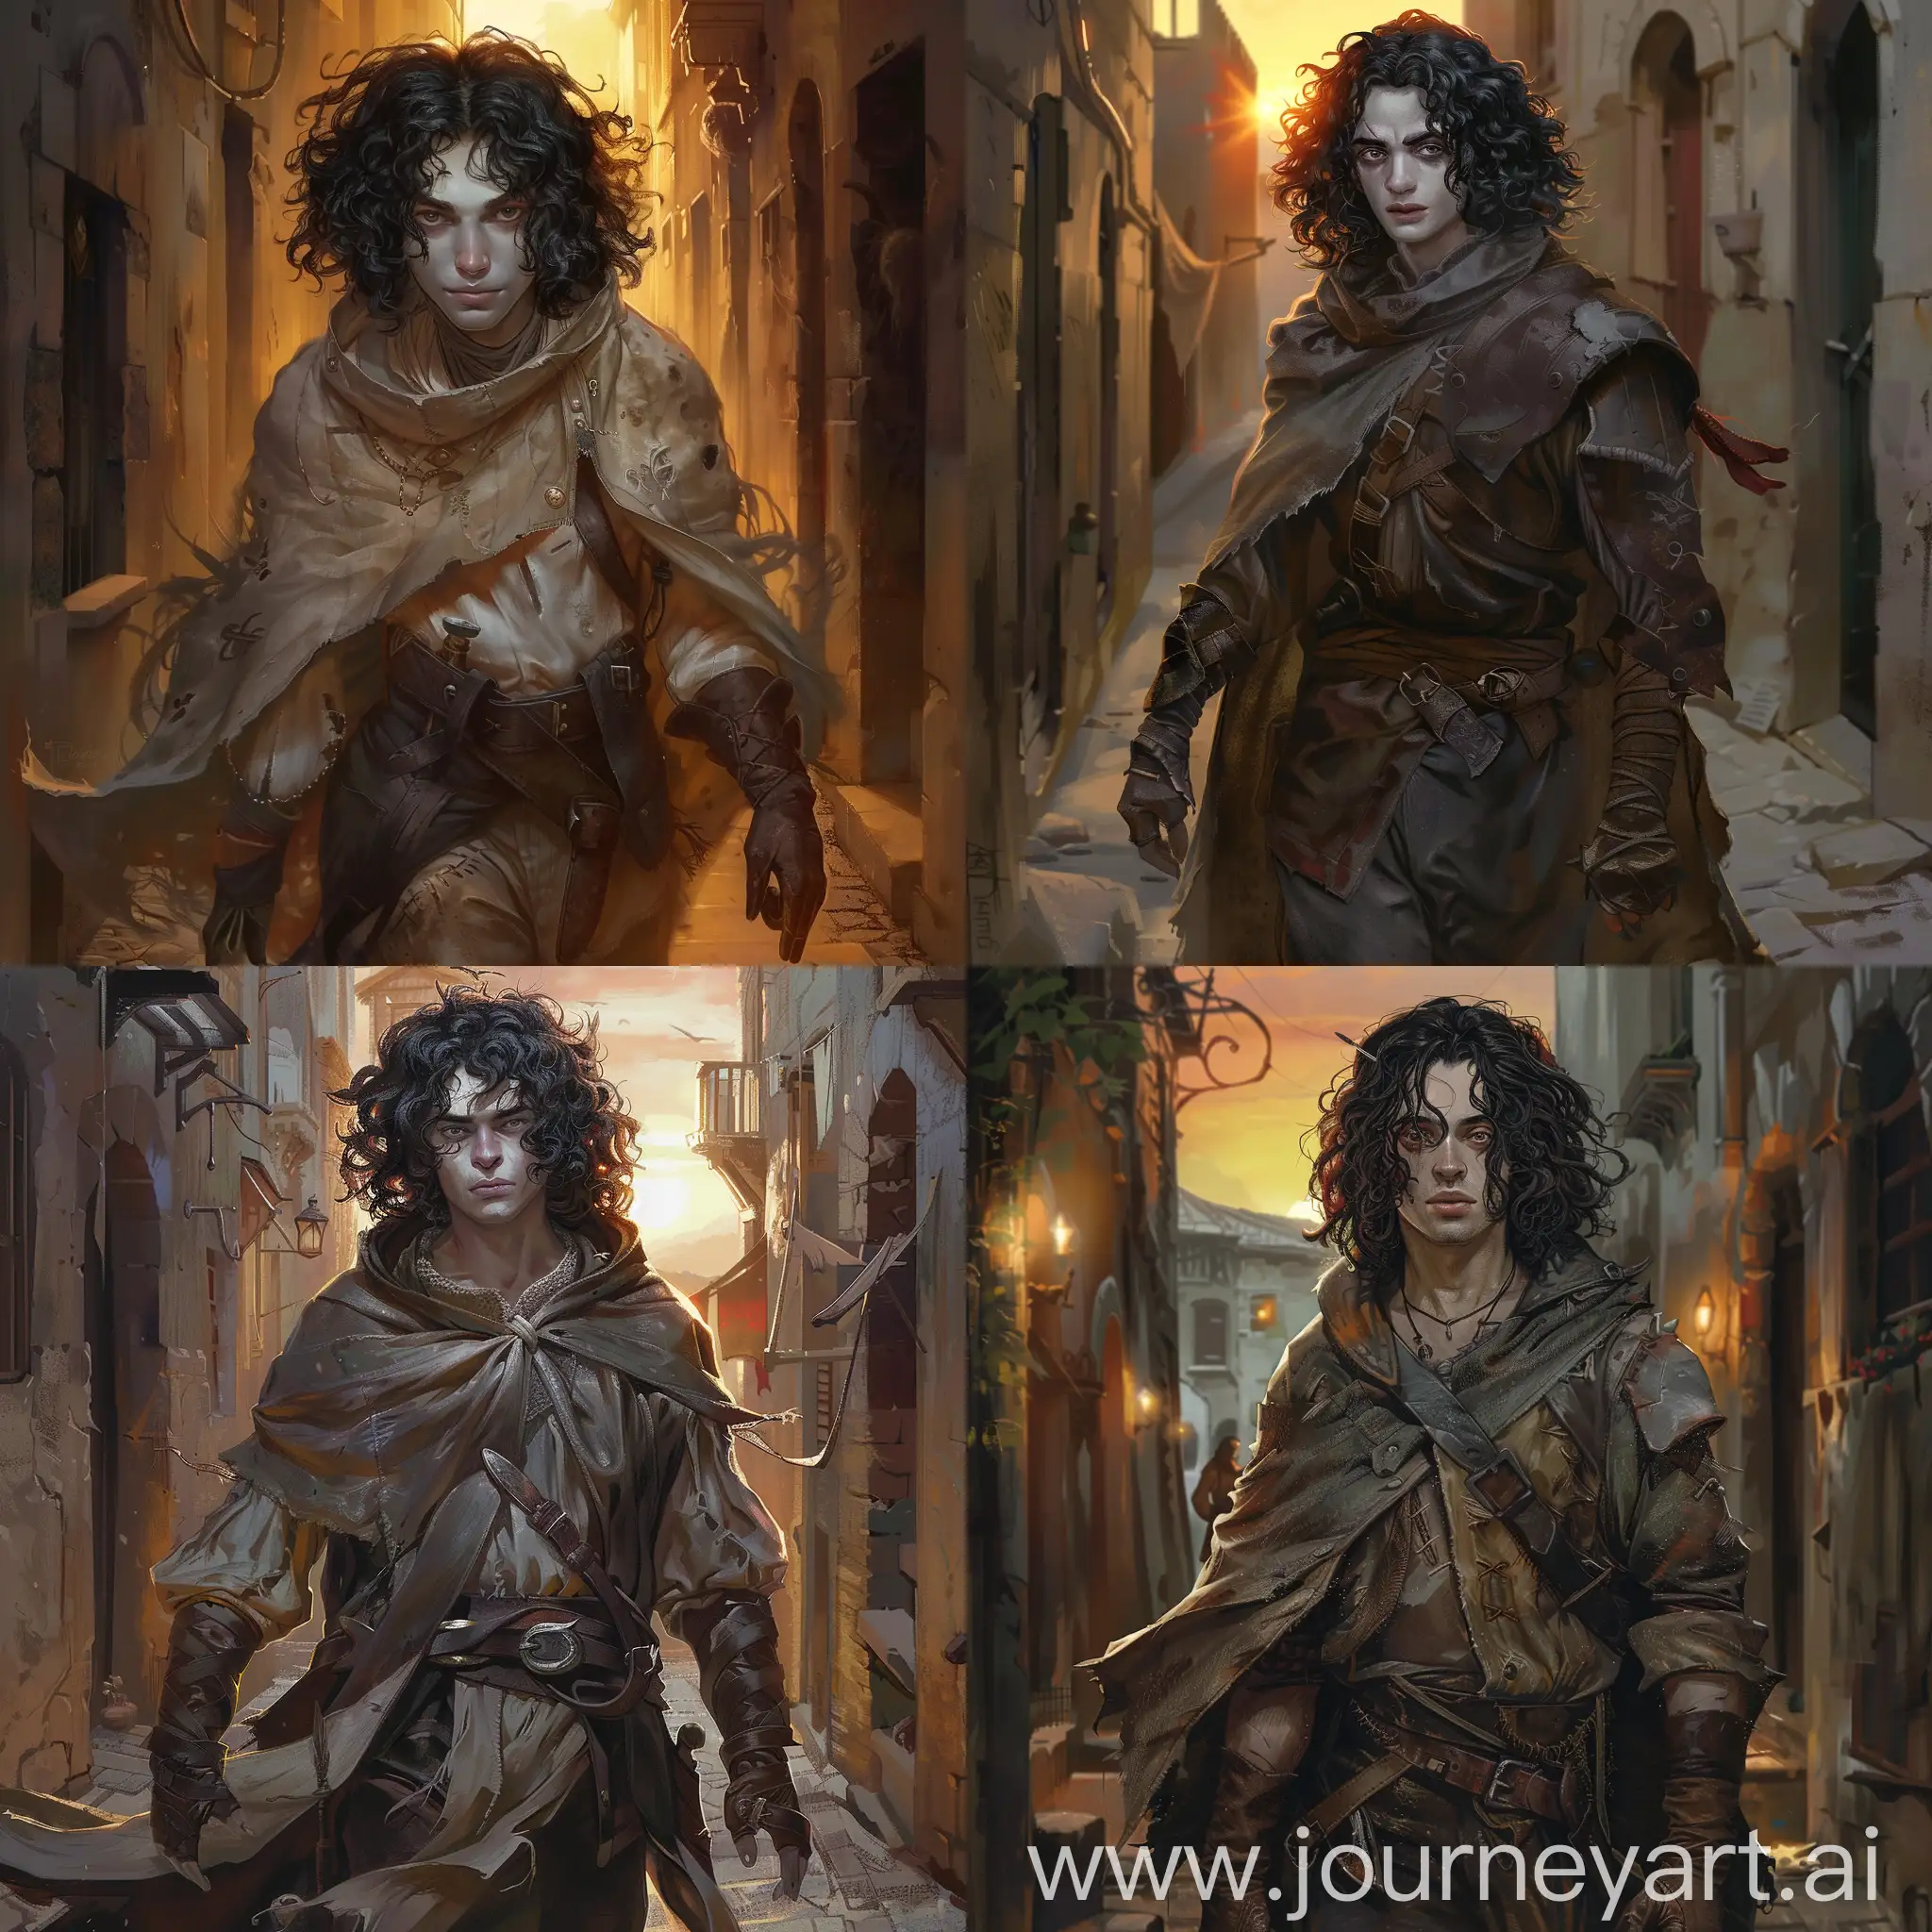 Draw a realistic art of a character from the Dungeons and Dragons universe according to the following description: He is a 20 years old human male artificer with over the shoulder length black curly hair and dark grey eyes. He has pale white skin, and a very slim tall build. His young face is clean shaven.
He wears an old leather poncho and long brown leather gloves.
His clothes and face are dirty with grime from his hard work.
He is making his way through an alley with a sun setting.